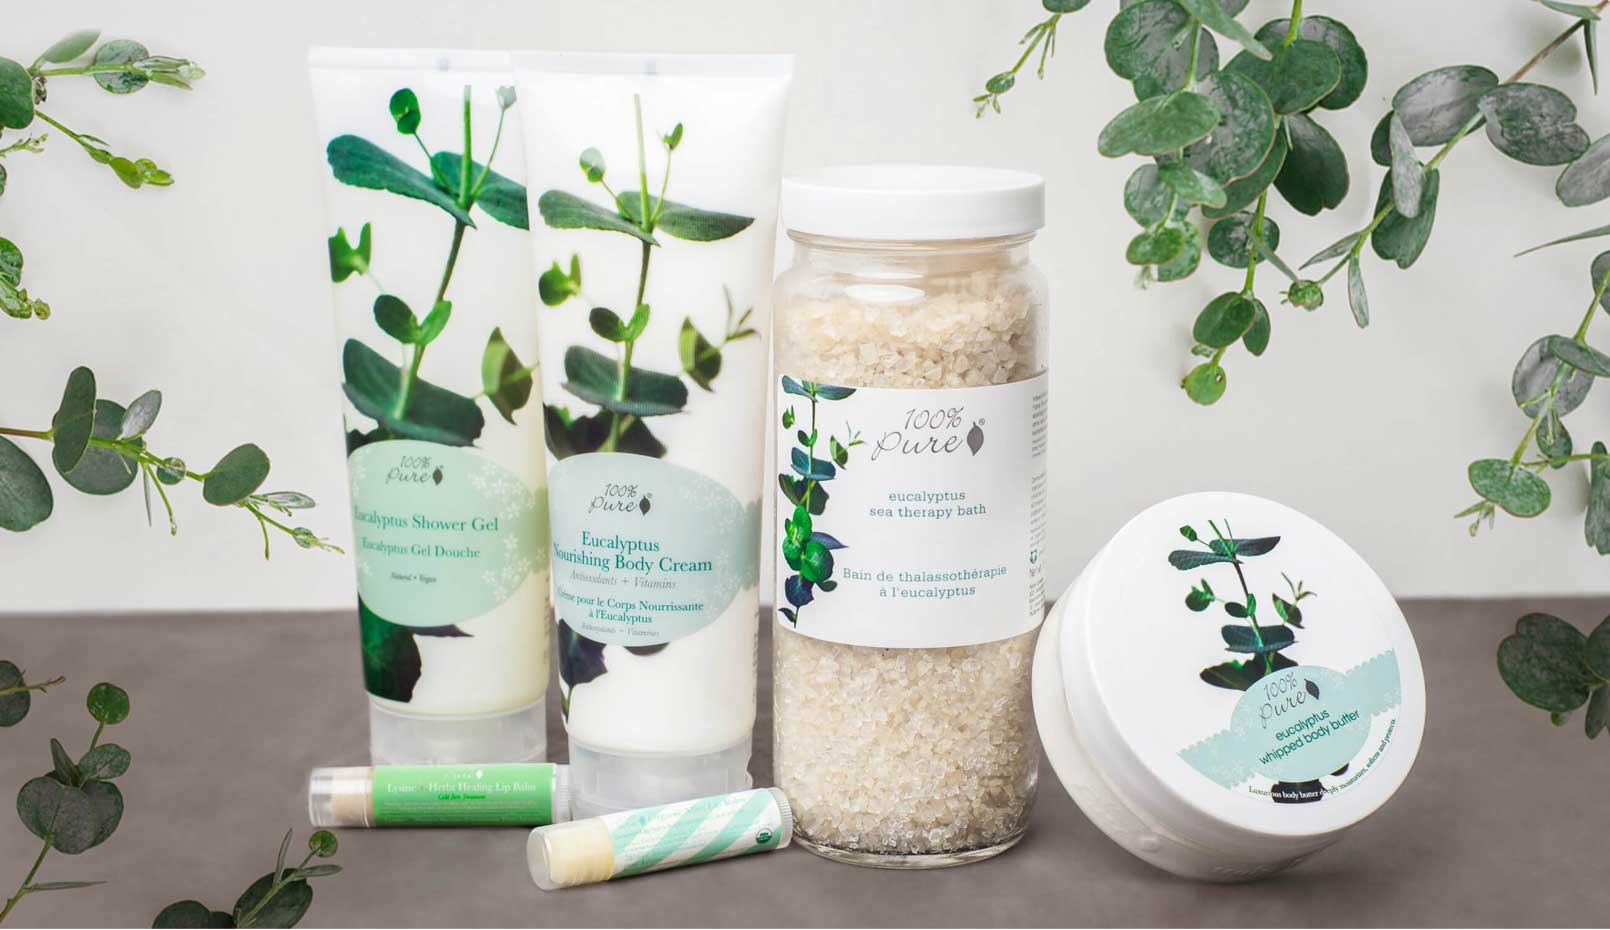 A lineup of skin care and bath products, such as shower gel, bath salts, and lip balms.